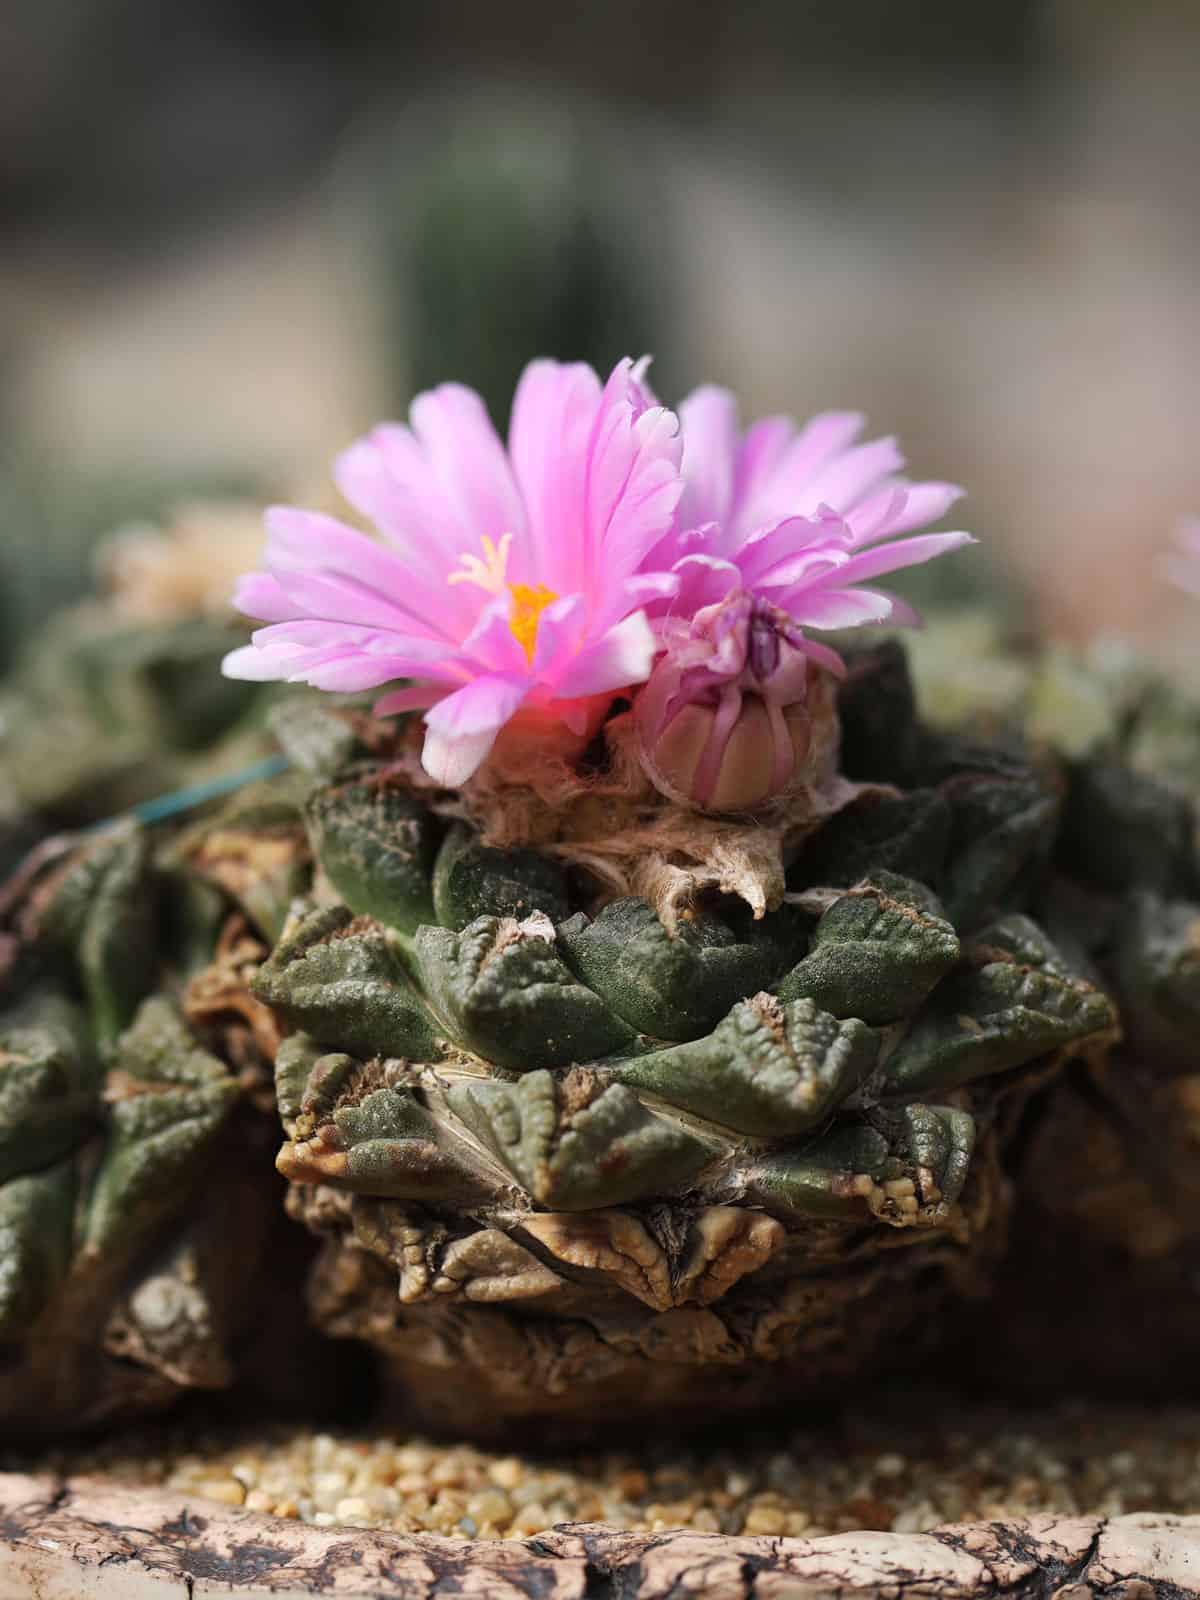 Bright pink flowers of a Living rock cactus